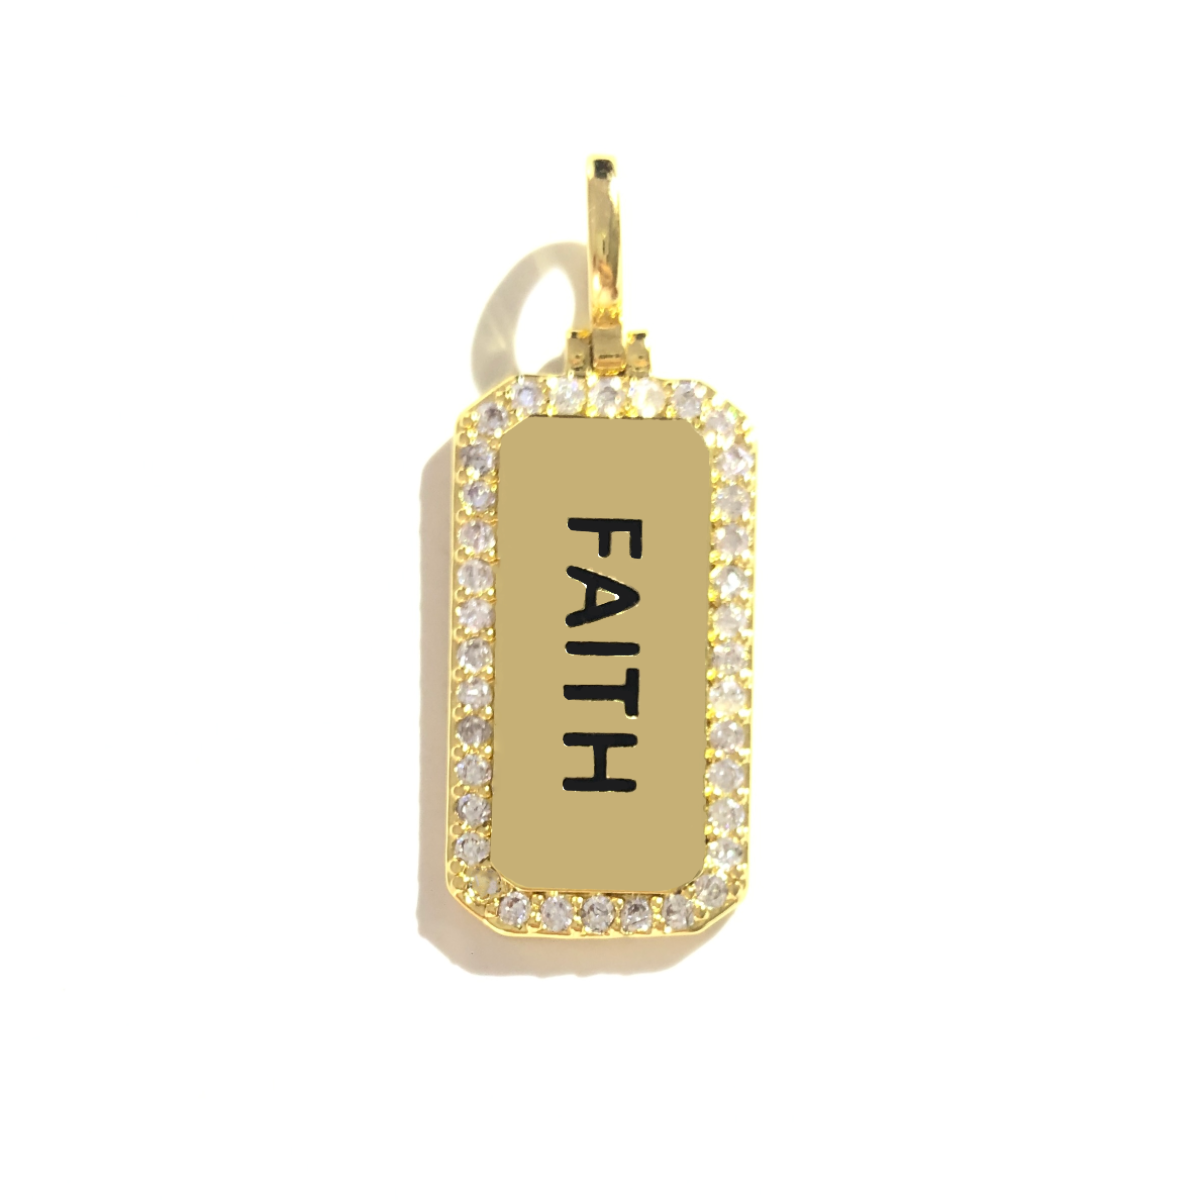 10pcs/lot 38*15mm CZ Paved Faith Word Tags Charms Pendants Gold CZ Paved Charms Christian Quotes New Charms Arrivals Word Tags Charms Beads Beyond